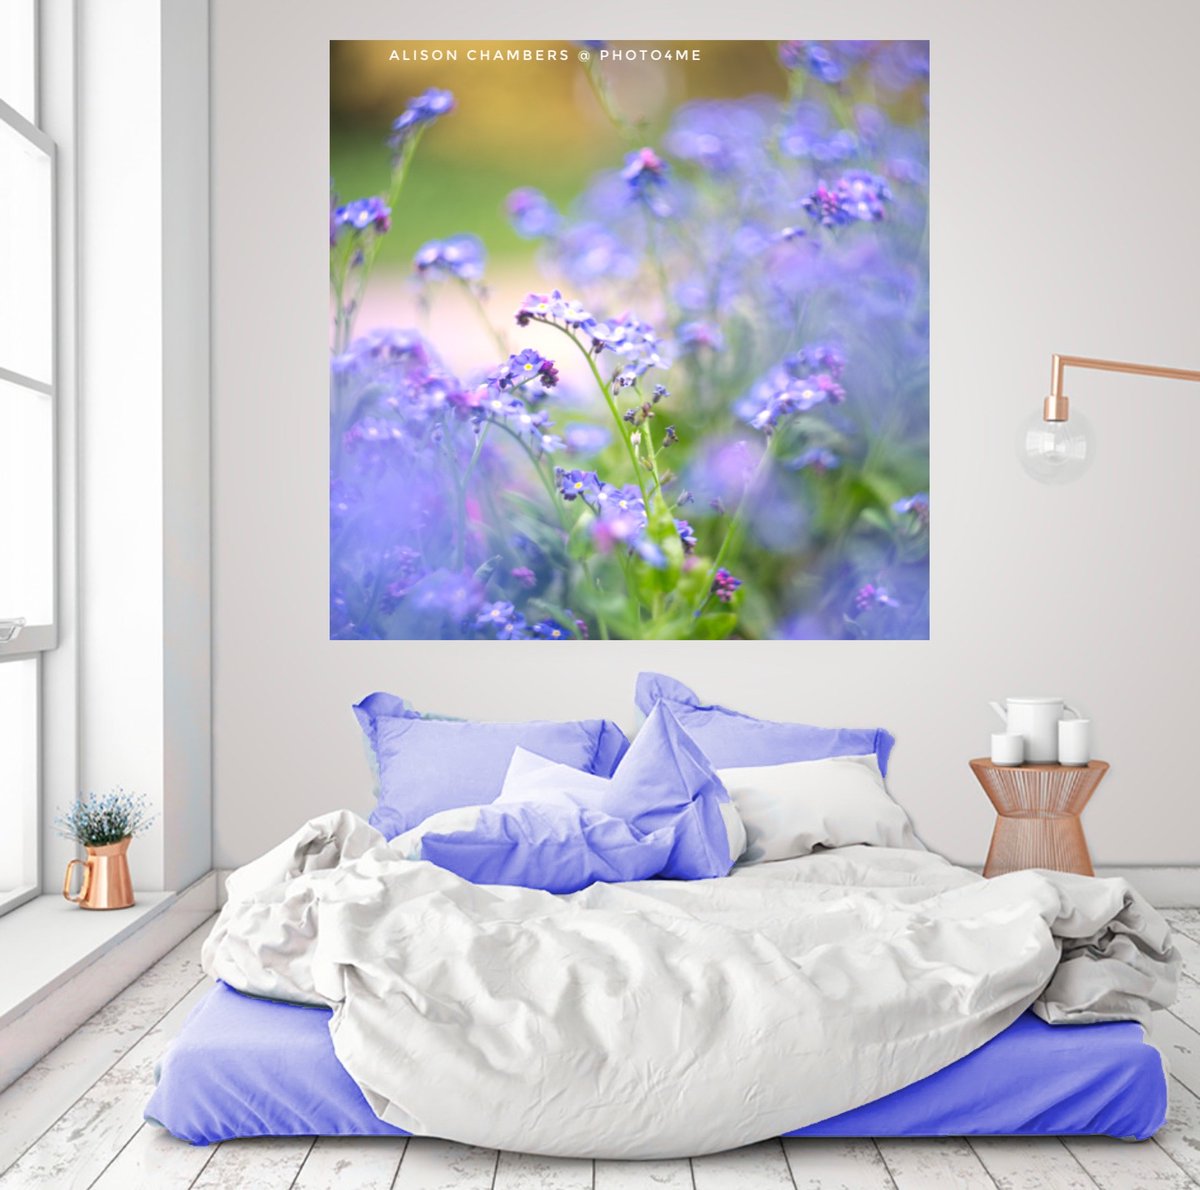 Forget-me-Nots©️. Available from; shop.photo4me.com/1326164 & redbubble.com/shop/ap/160537… & 2-alison-chambers.pixels.com #forgetmenots #forgetmenot #forgetmenotflowers #flowerphotography #Photo4Me #redbubble #fineartamerica #redbubbleartist #fineartamericaartist #somethingblue